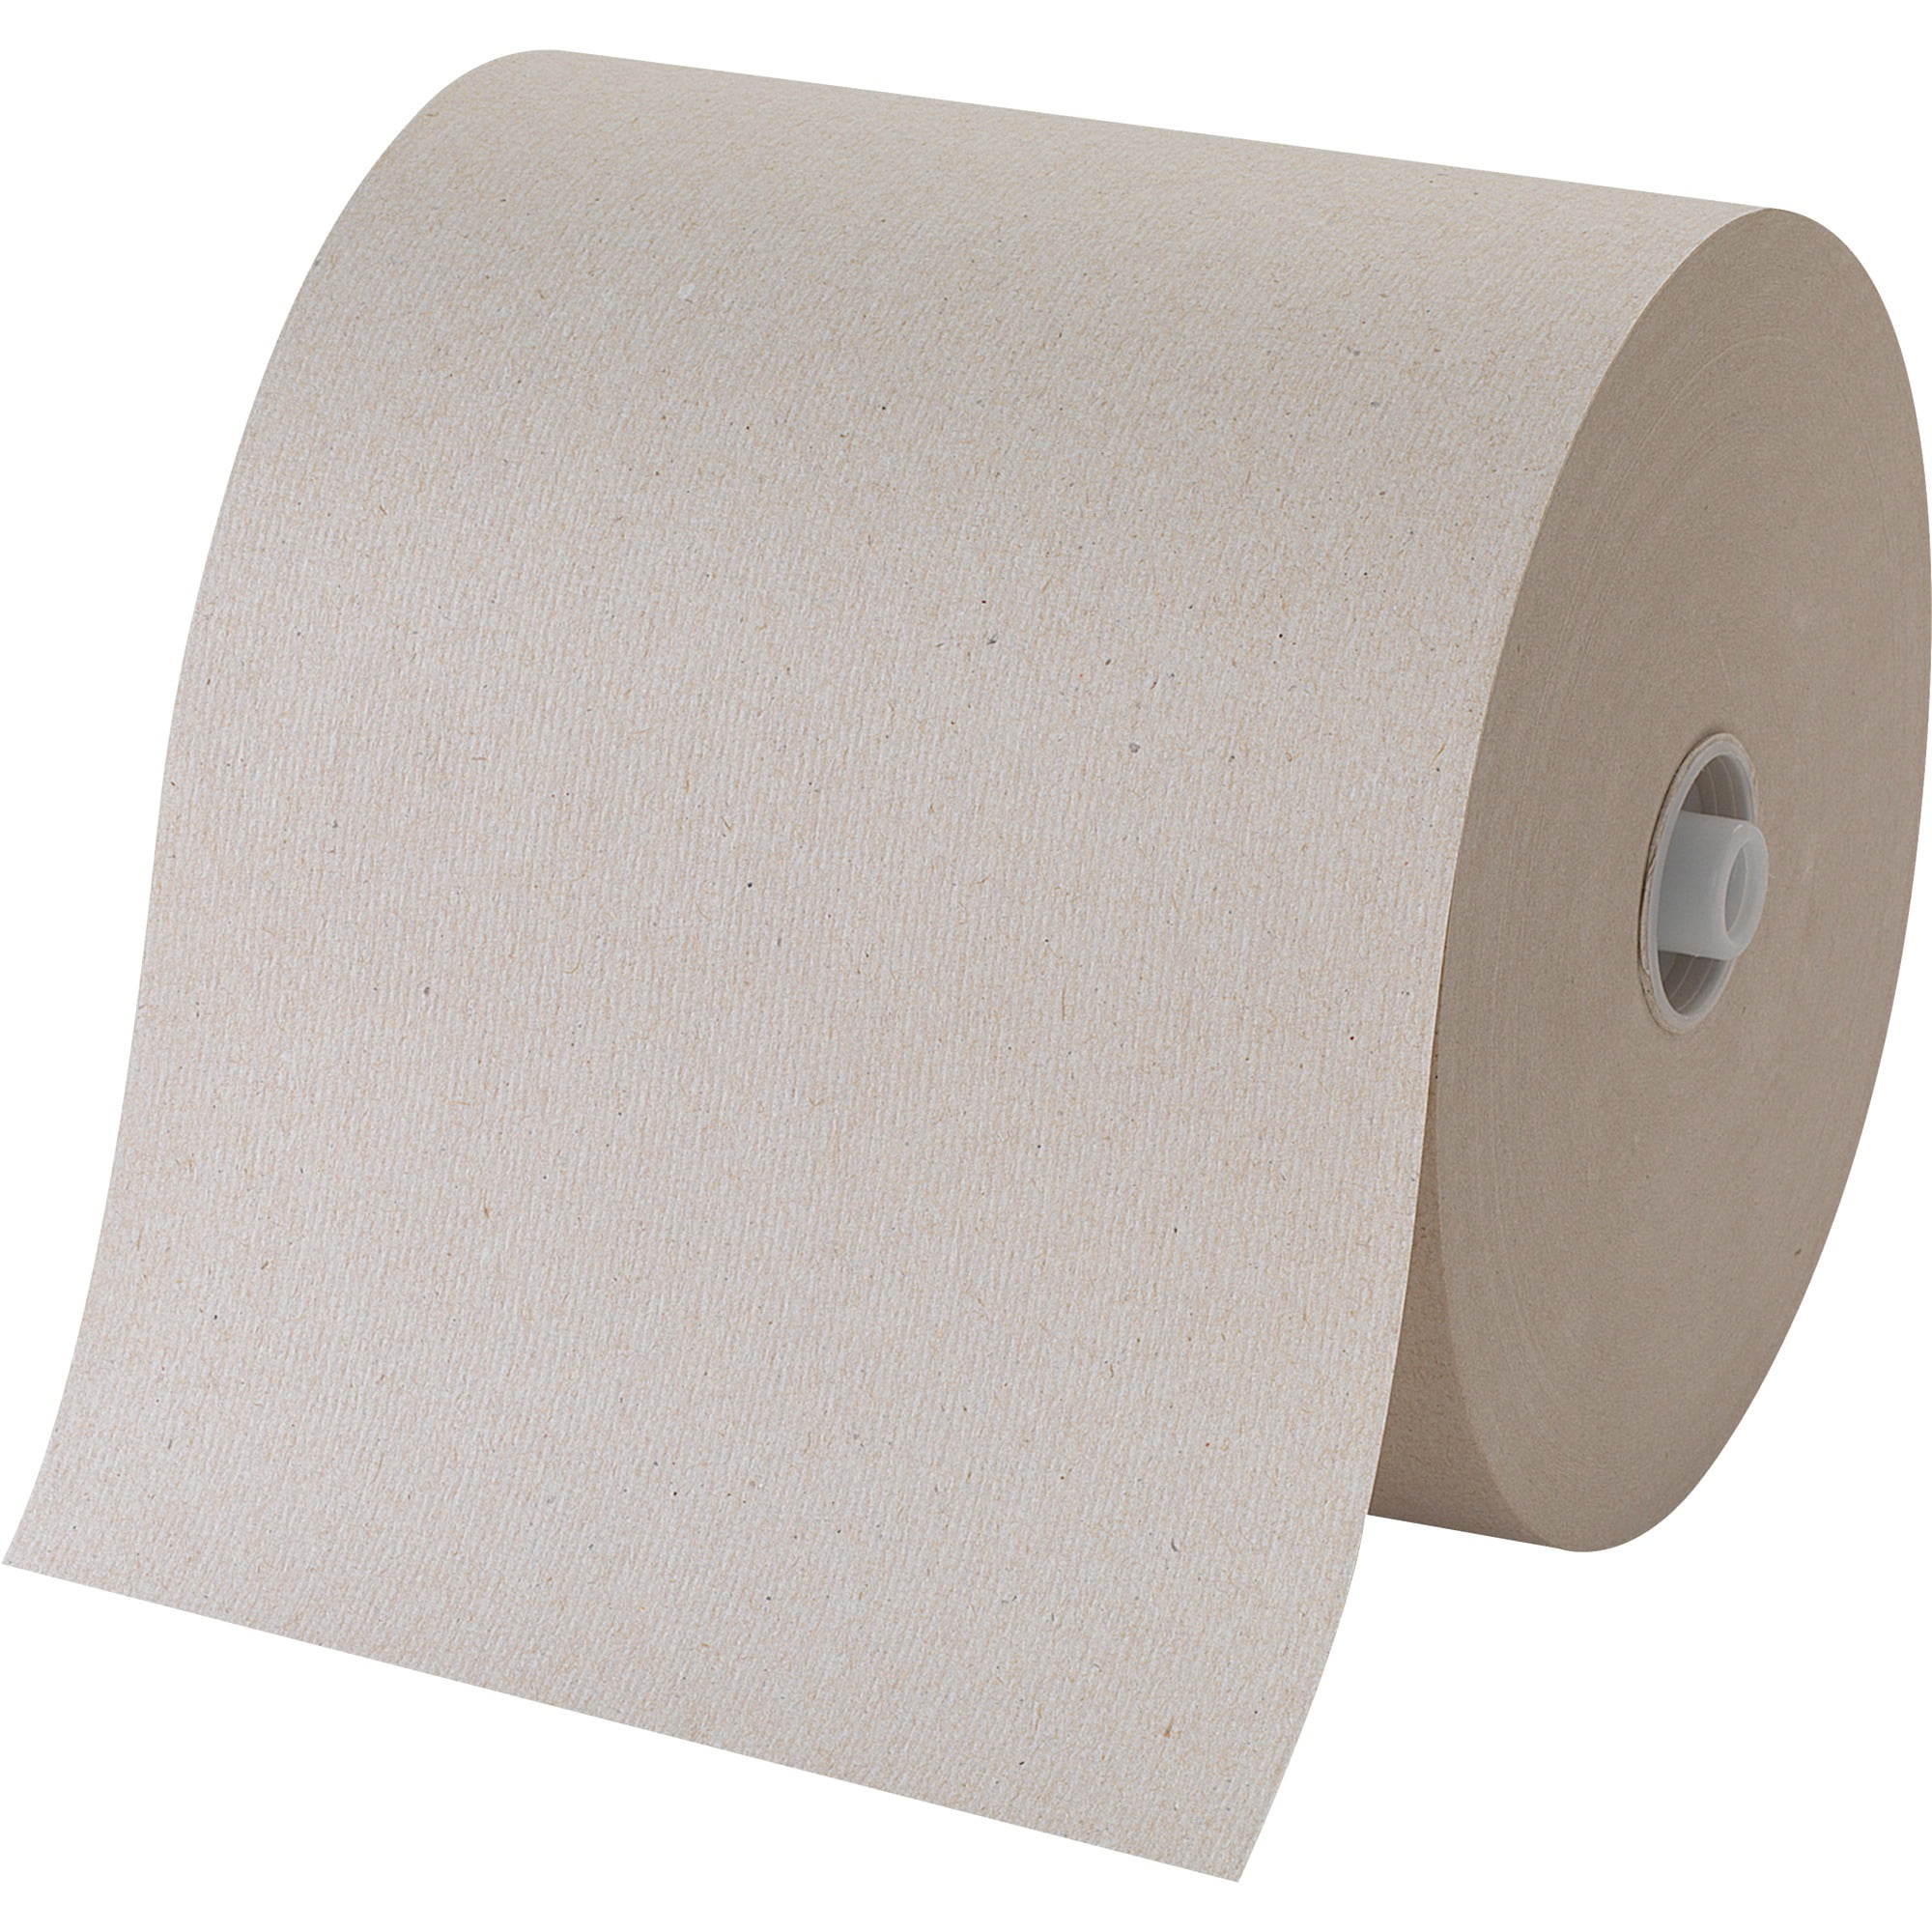 Georgia-Pacific Pacific Blue Ultratrade; 8" High-Capacity Recycled Paper Towel 